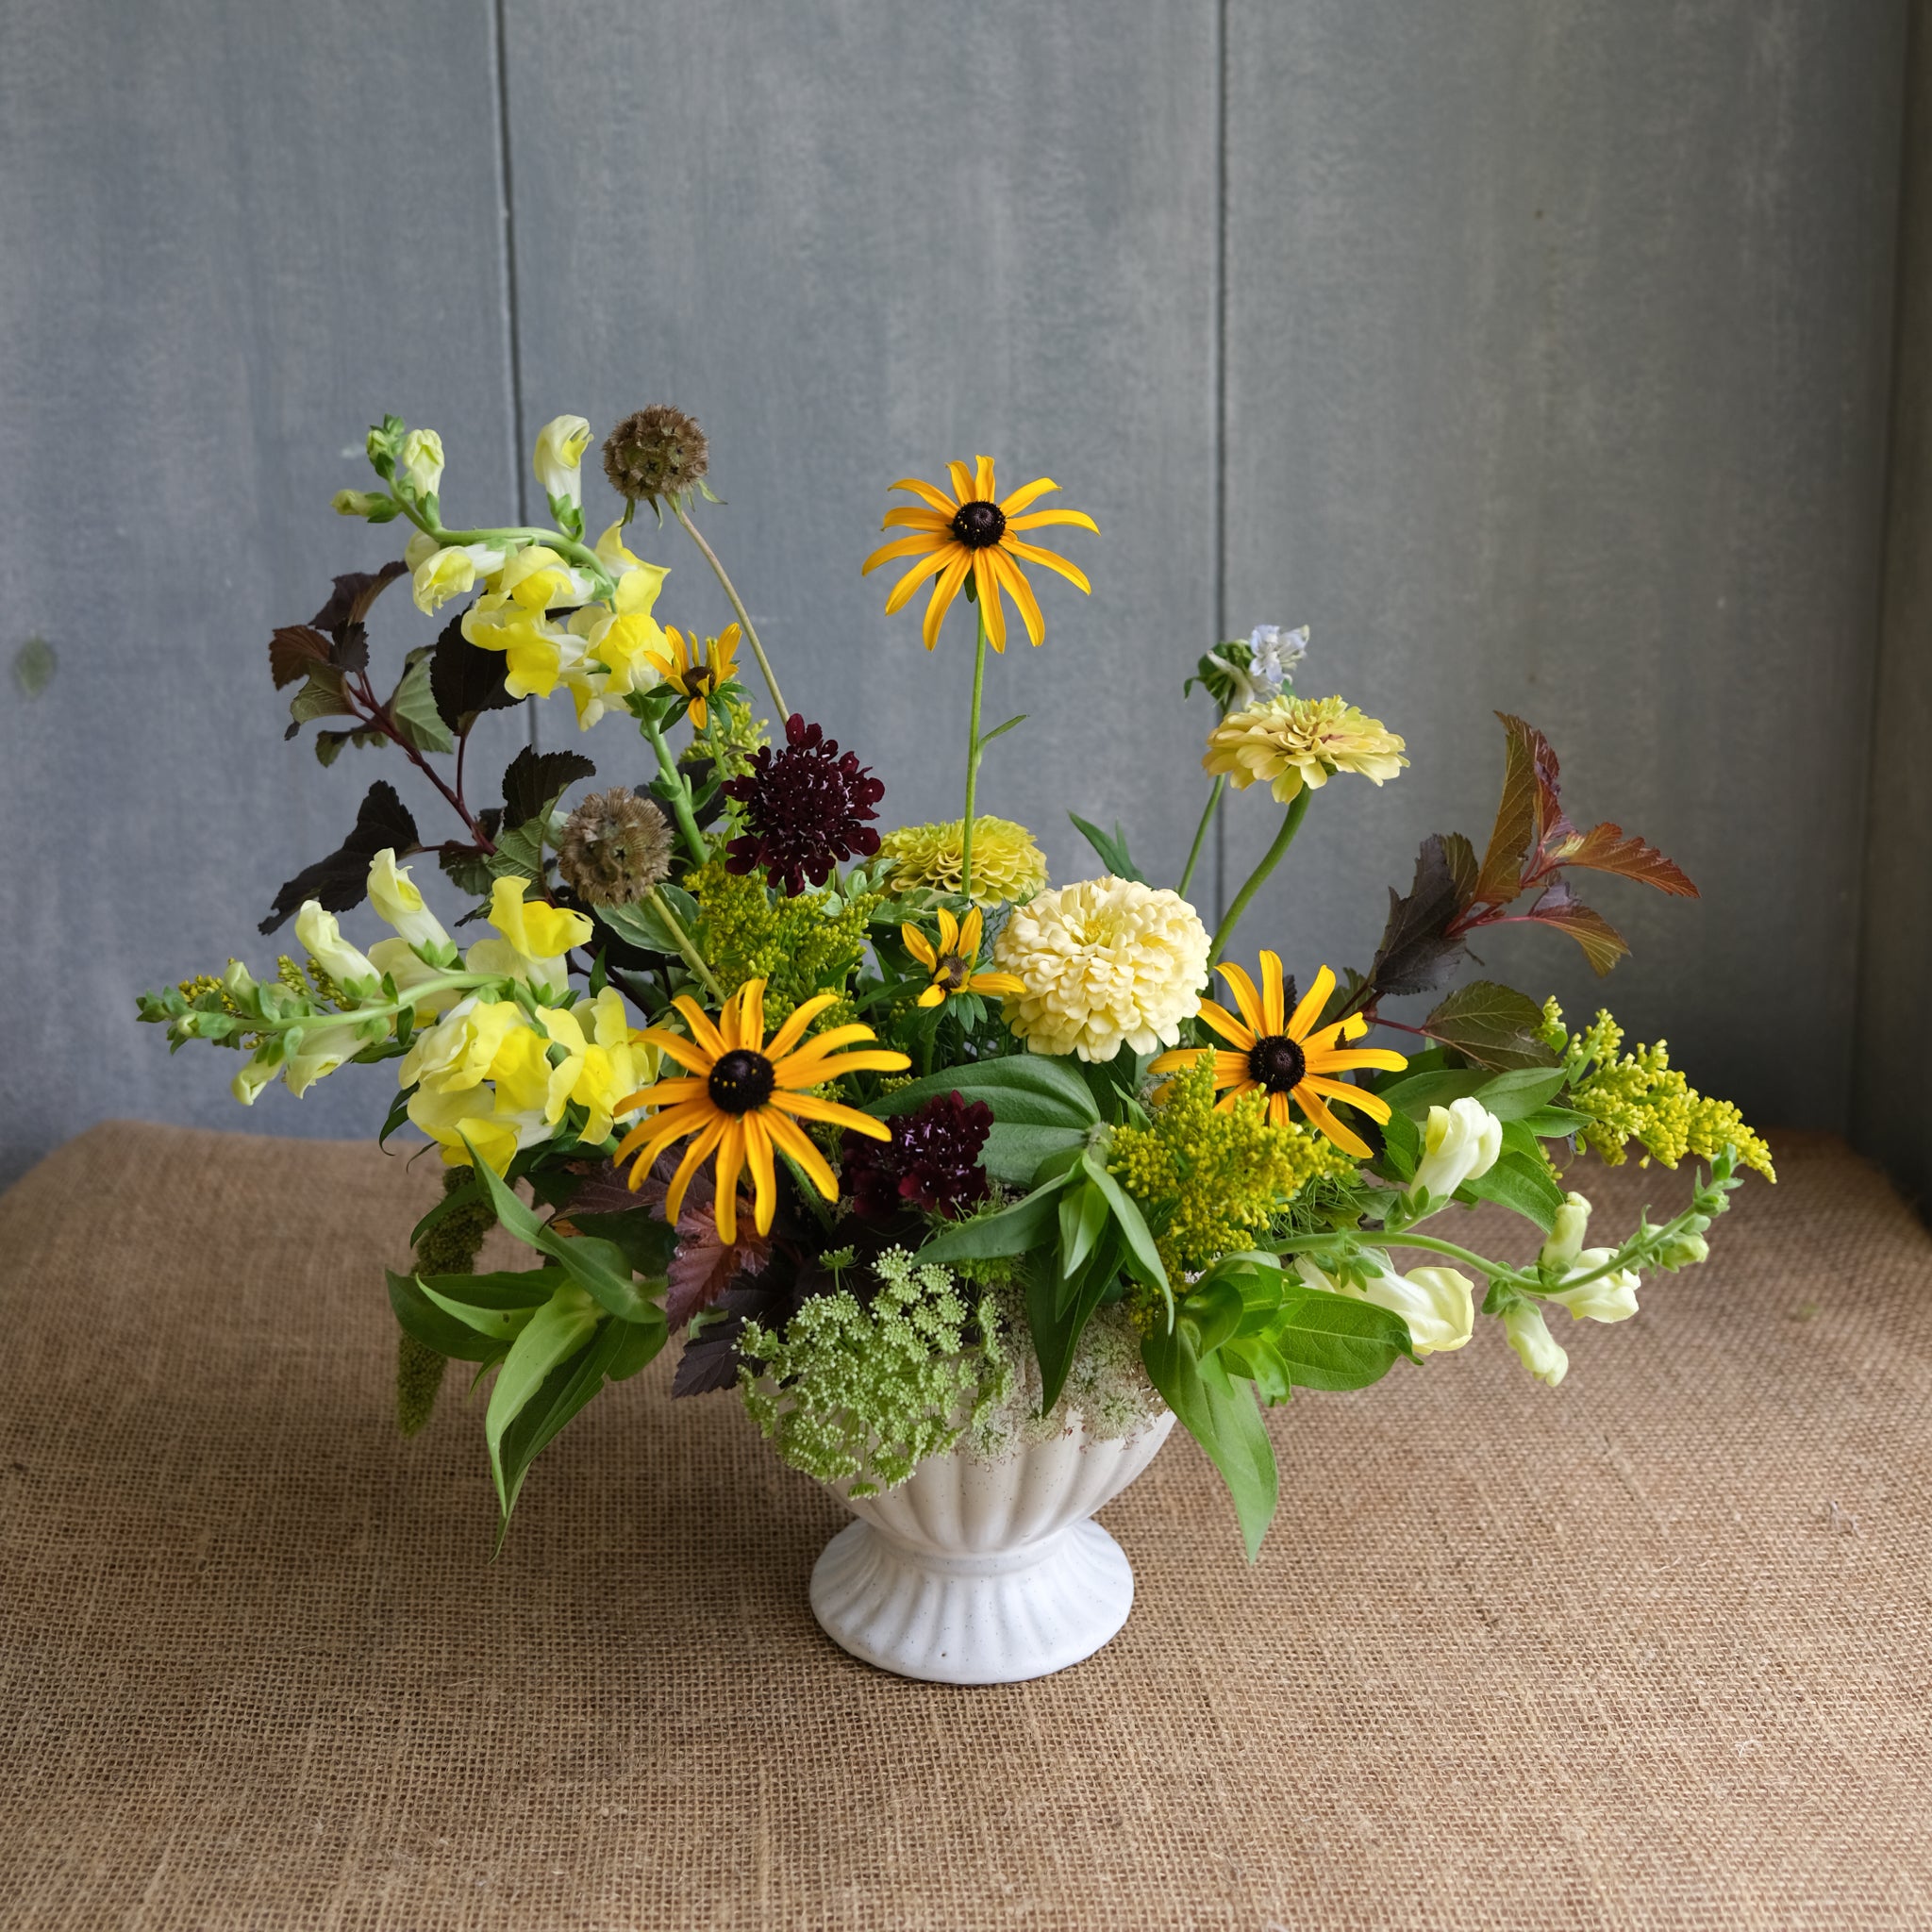 Asymmetrical, naturalistic arrangement featuring primarily yellow flowers